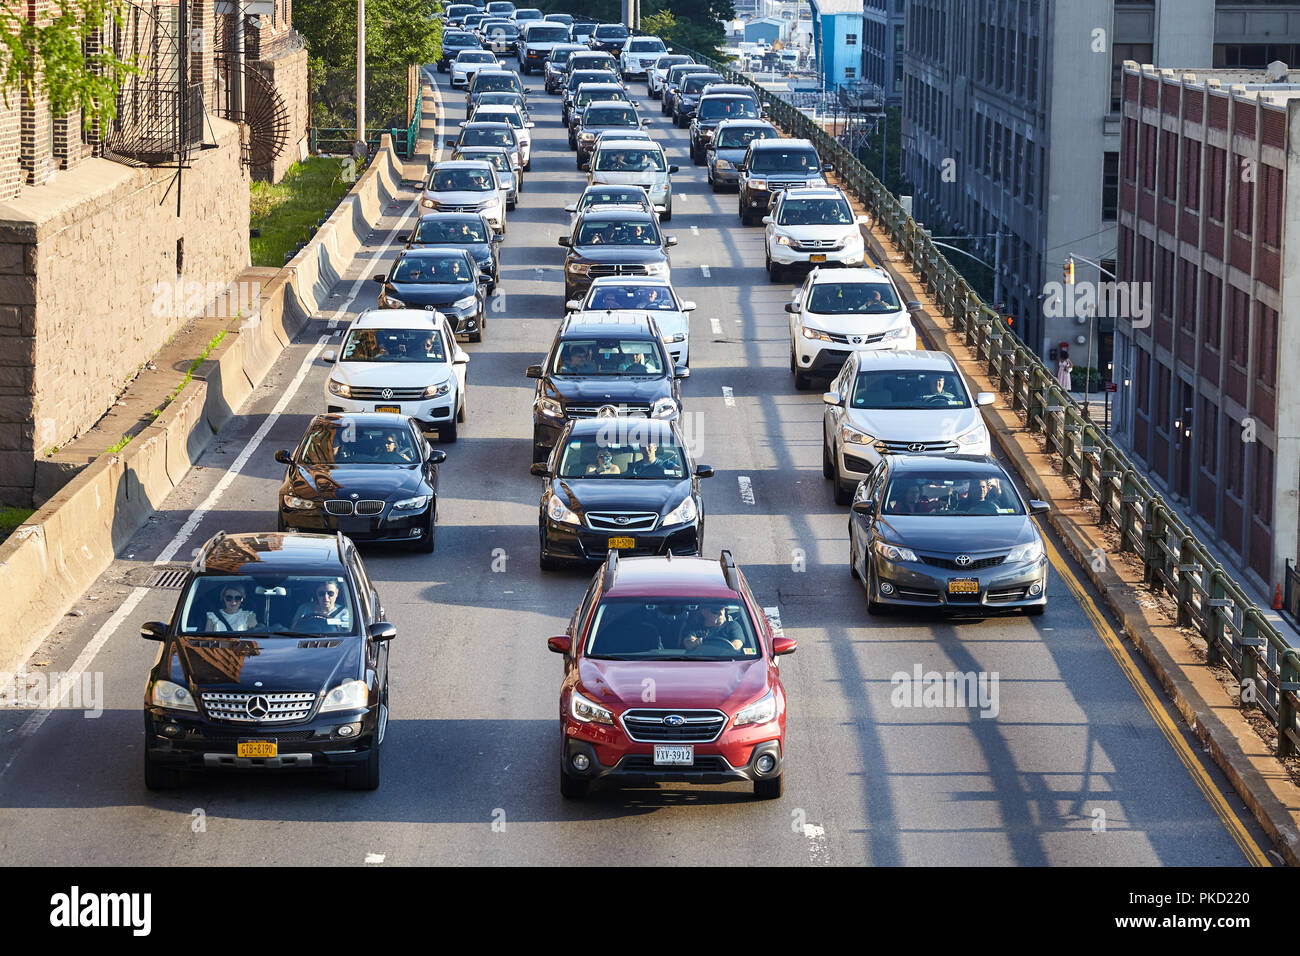 New York, USA - July 01, 2018: Traffic jam on the Brooklyn Queens Expressway (Interstate 278). Stock Photo